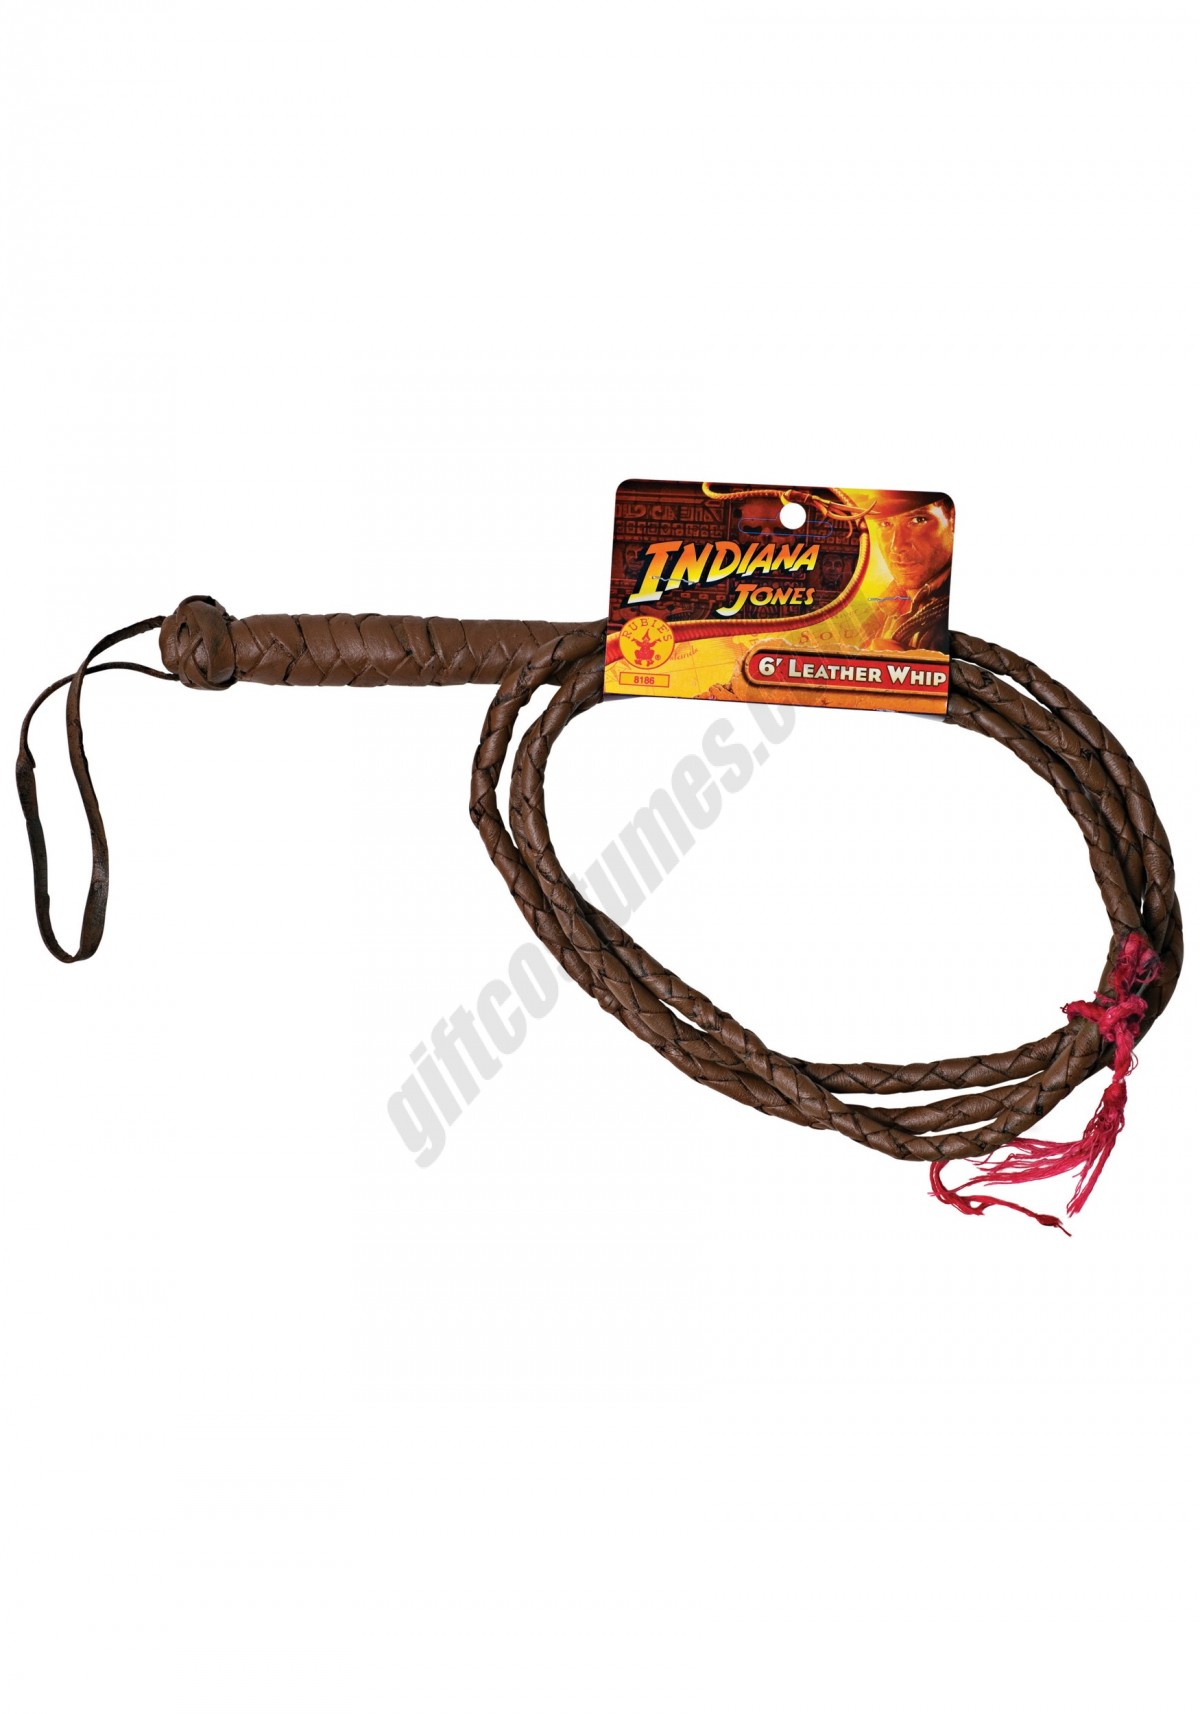 Leather Indiana Jones 6ft Whip Promotions - -0